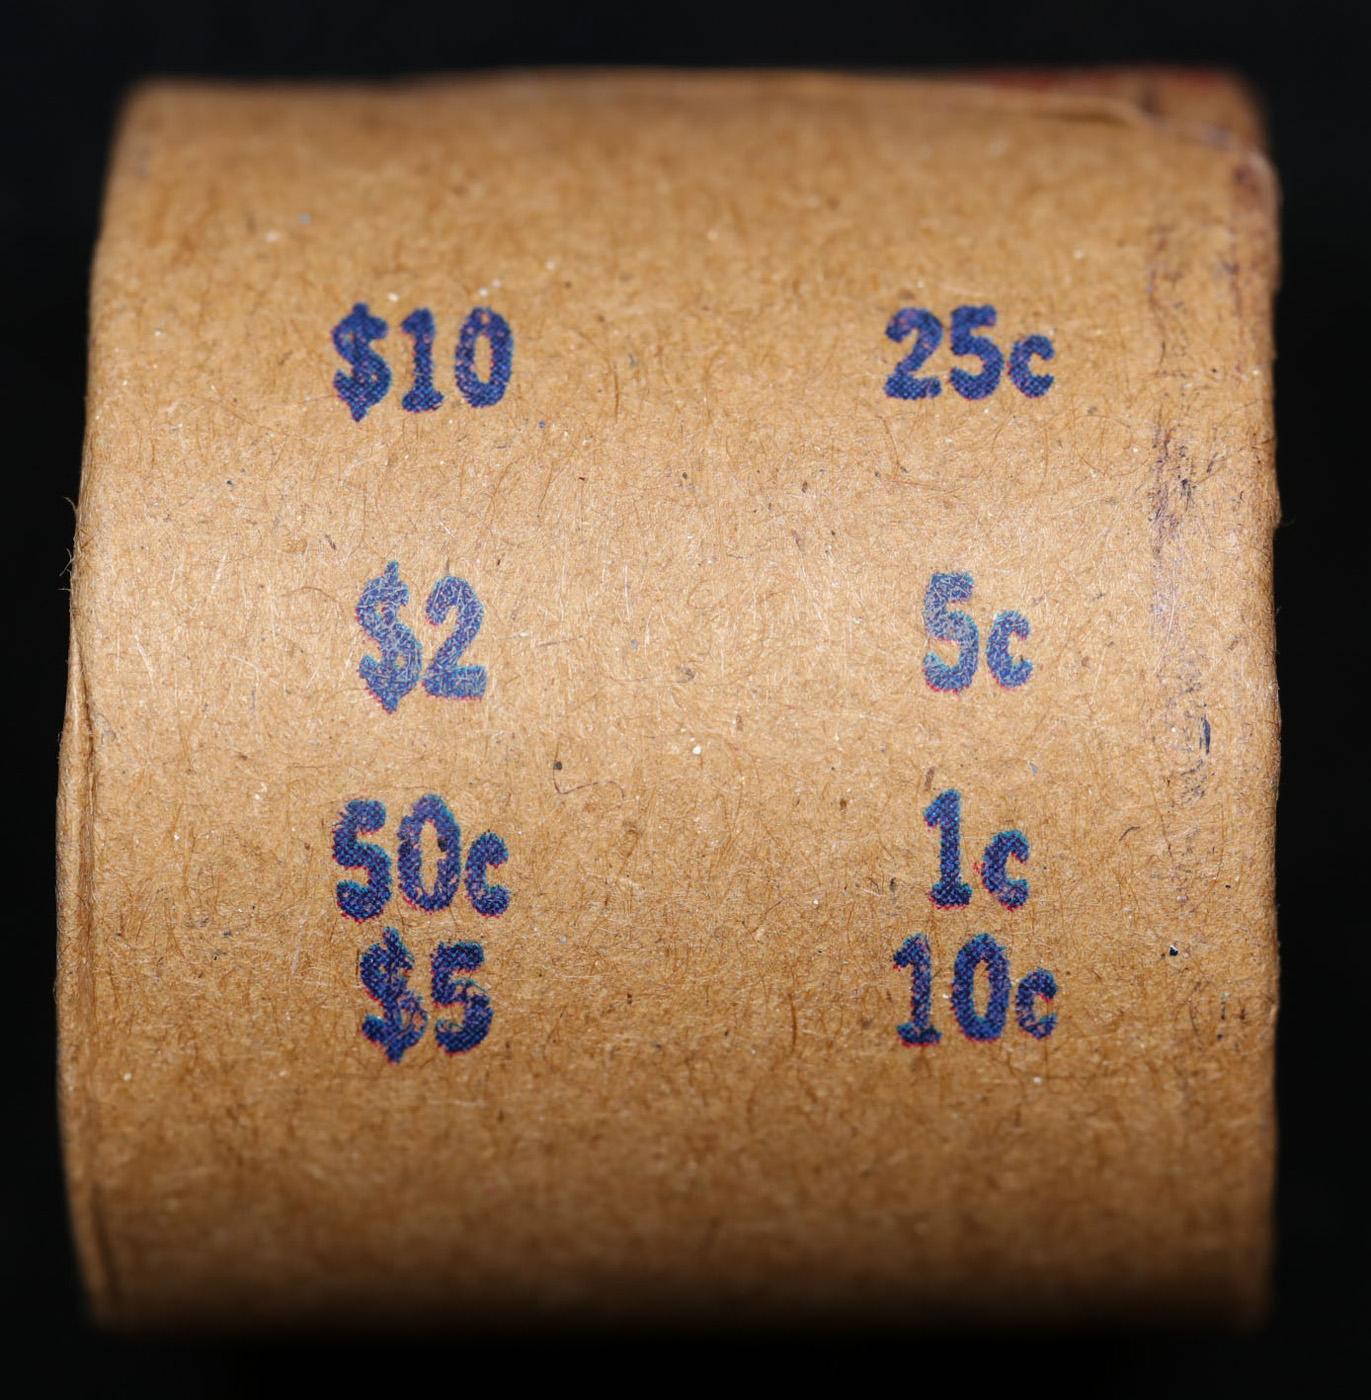 *EXCLUSIVE* Hand Marked "Unc Peace Limited," x10 coin Covered End Roll! - Huge Vault Hoard  (FC)